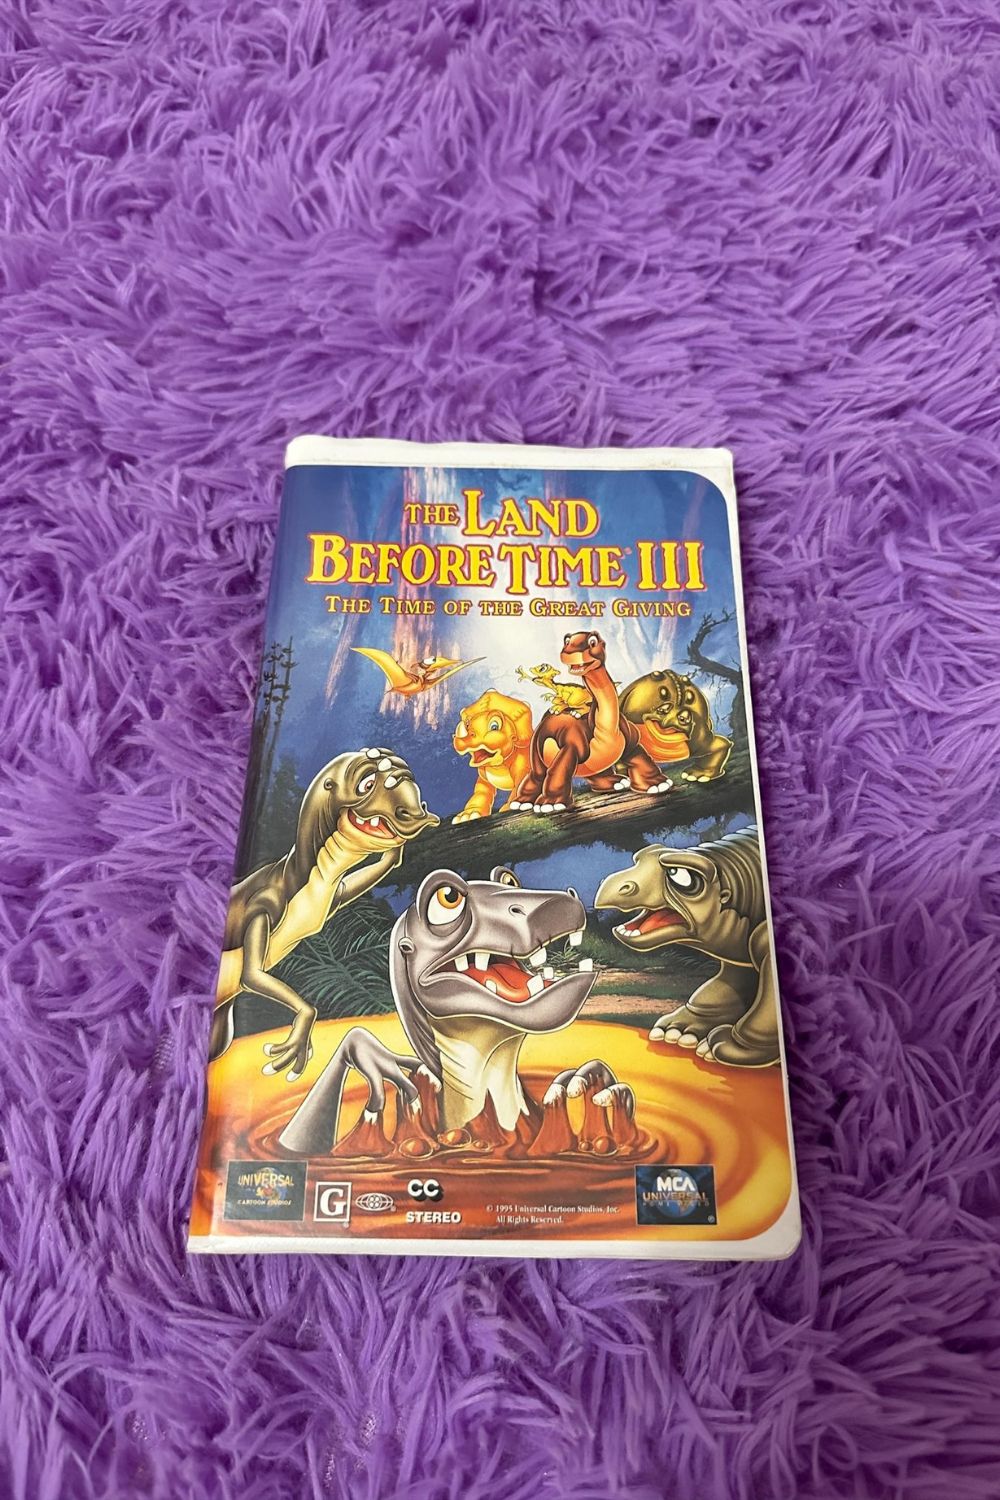 THE LAND BEFORE TIME III VHS*